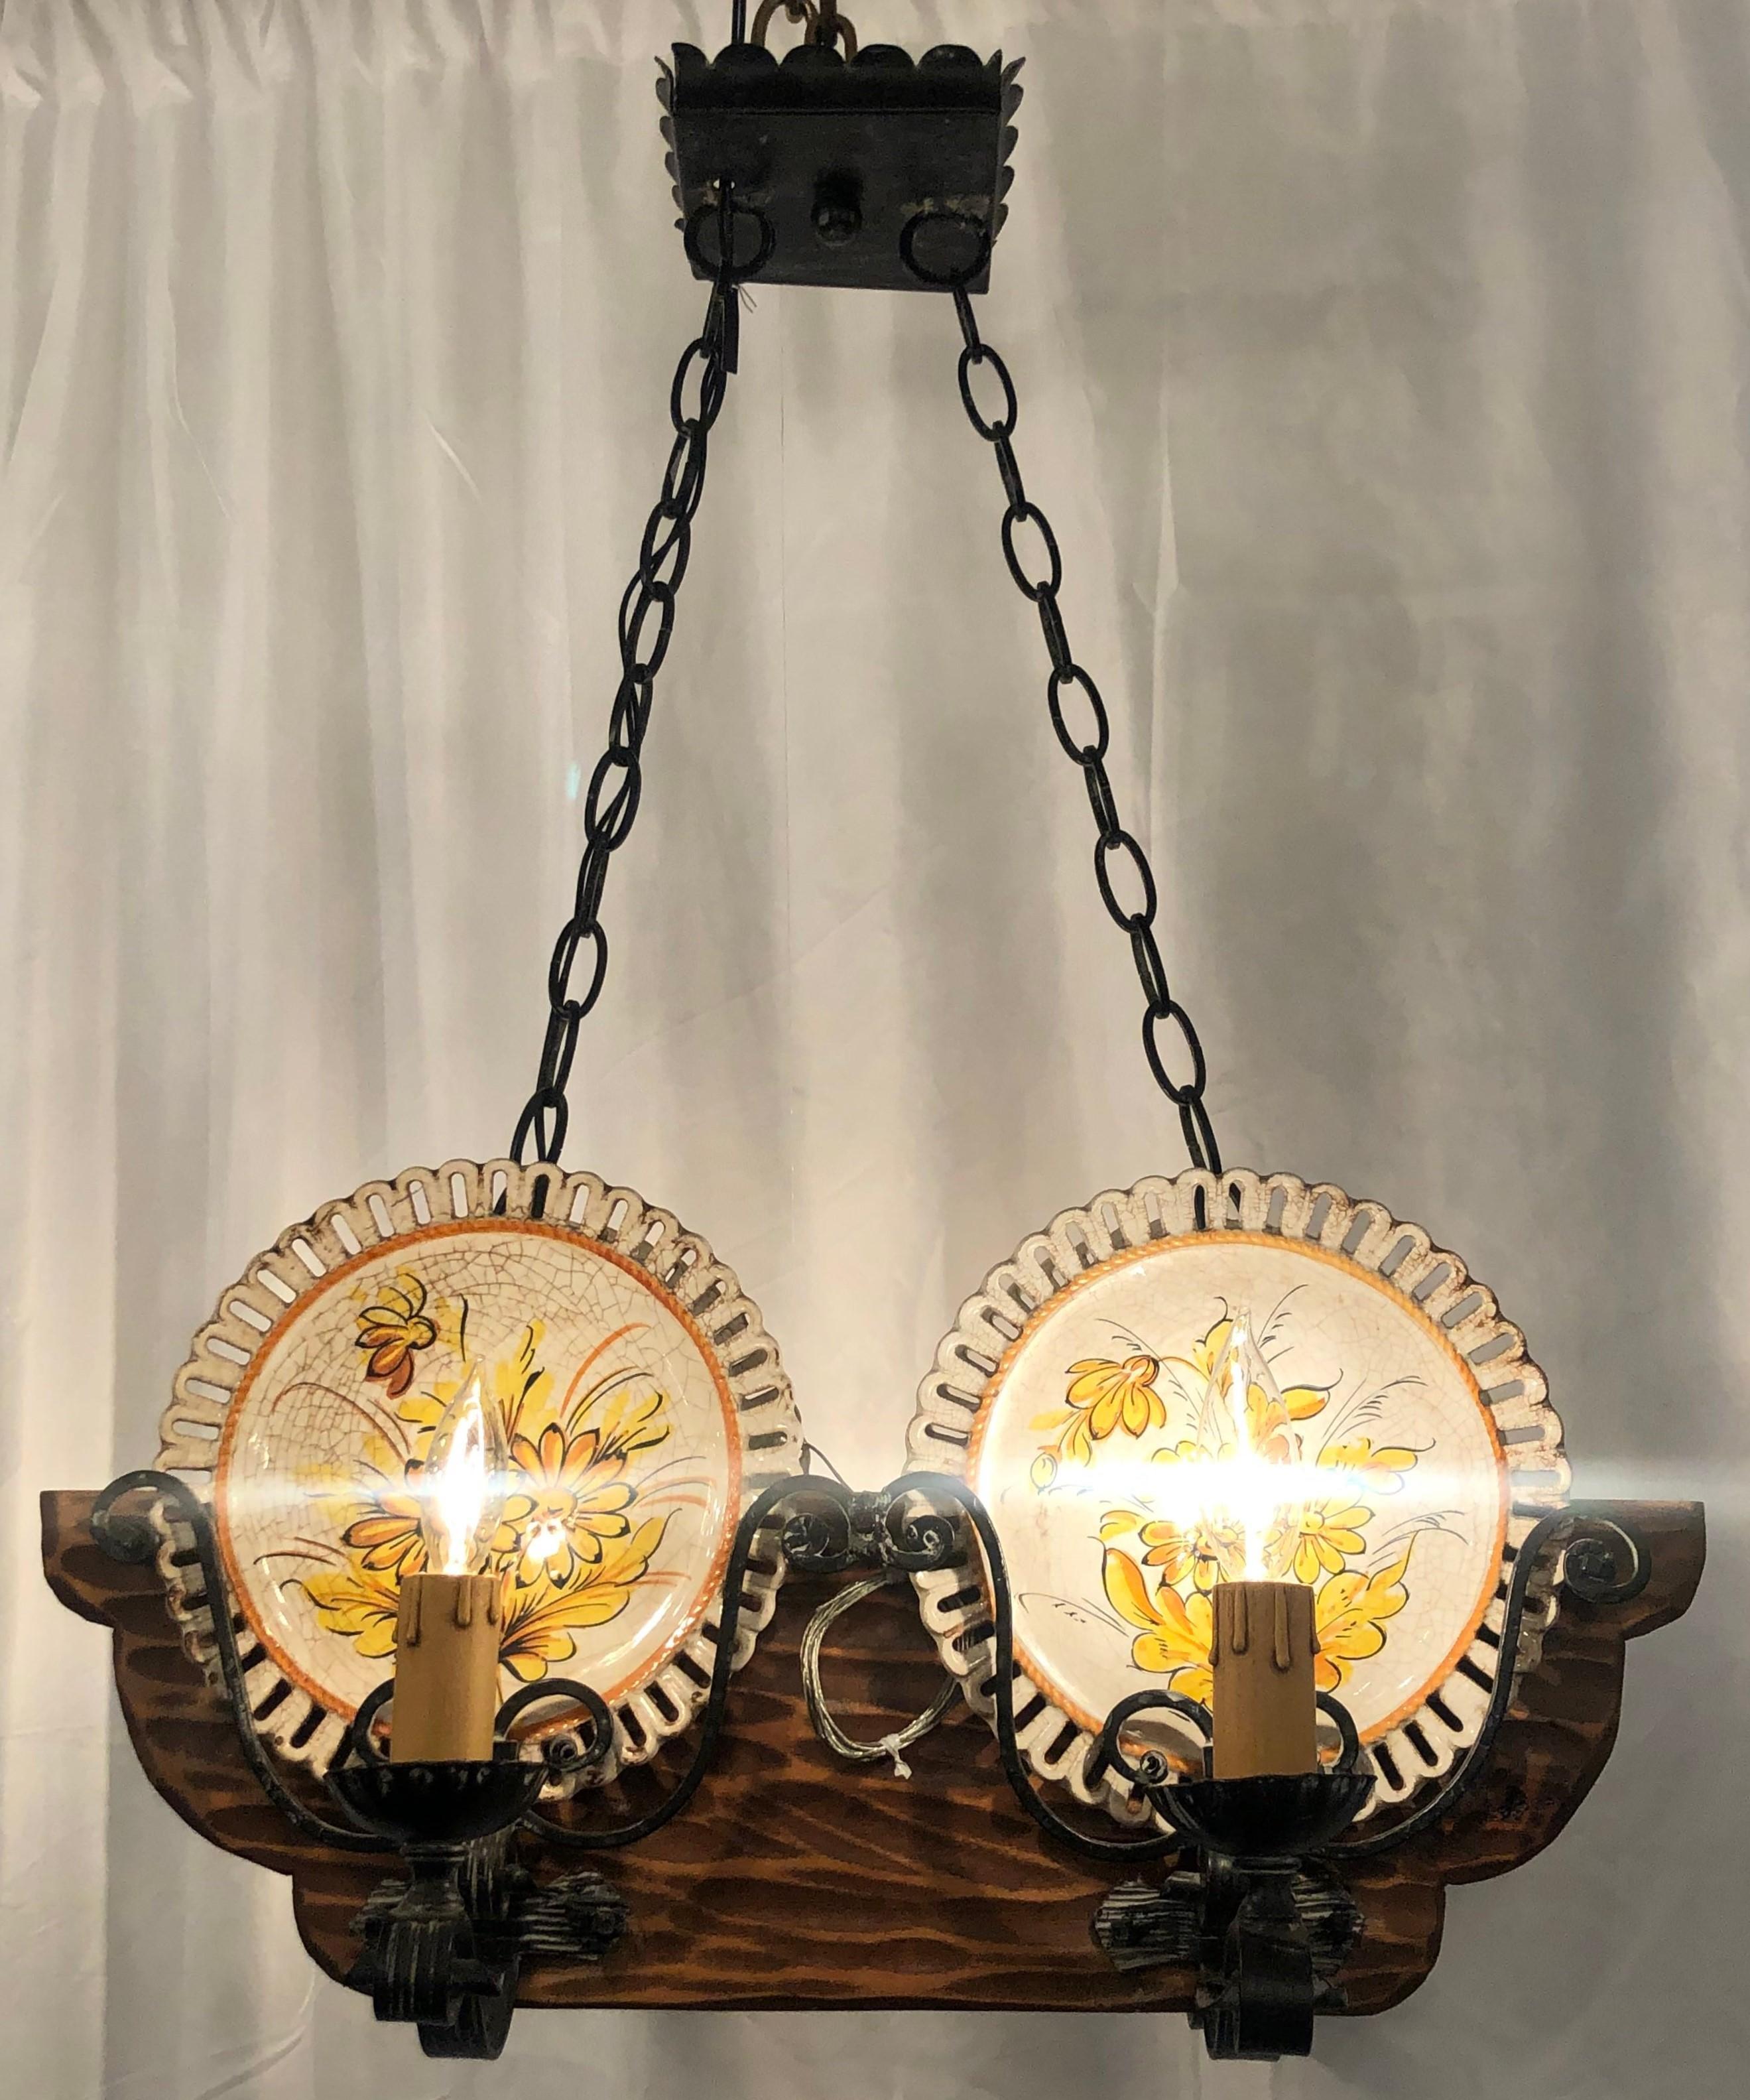 Hand-made wrought iron and carved wood porcelain plate-holder chandelier.